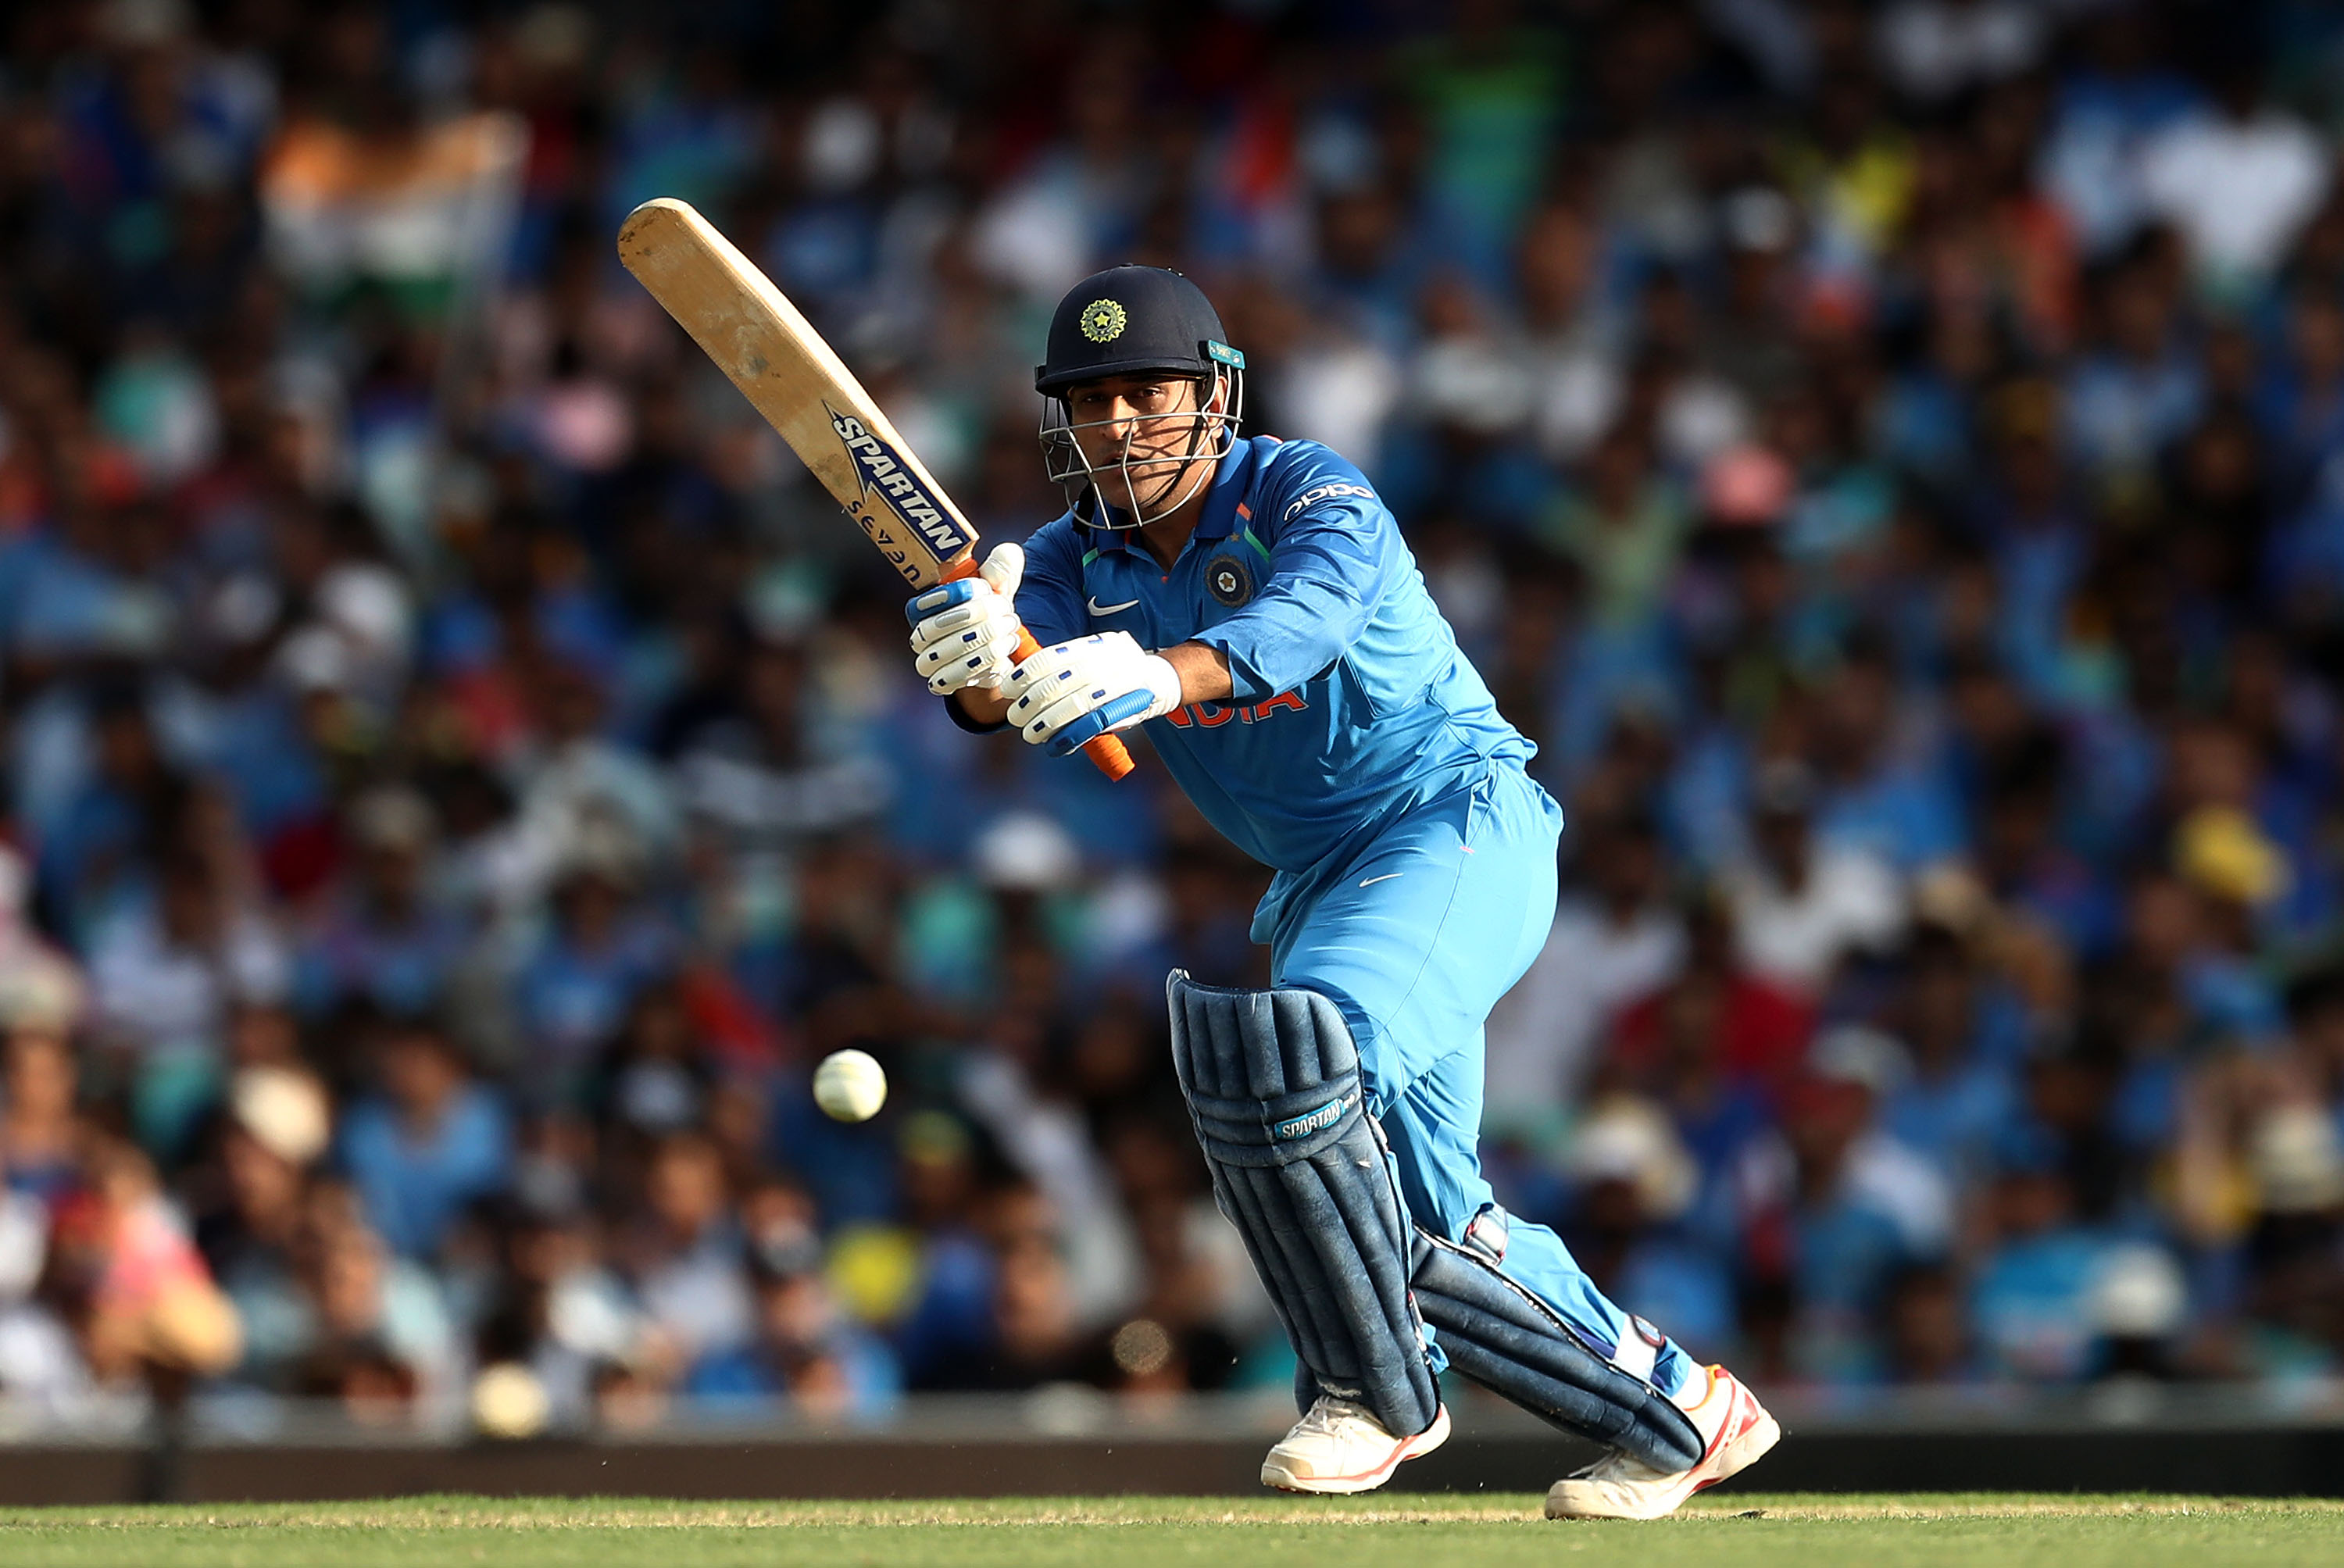 MS Dhoni should move up the India batting order, said Rohit Sharma after the first ODI loss against Australia.